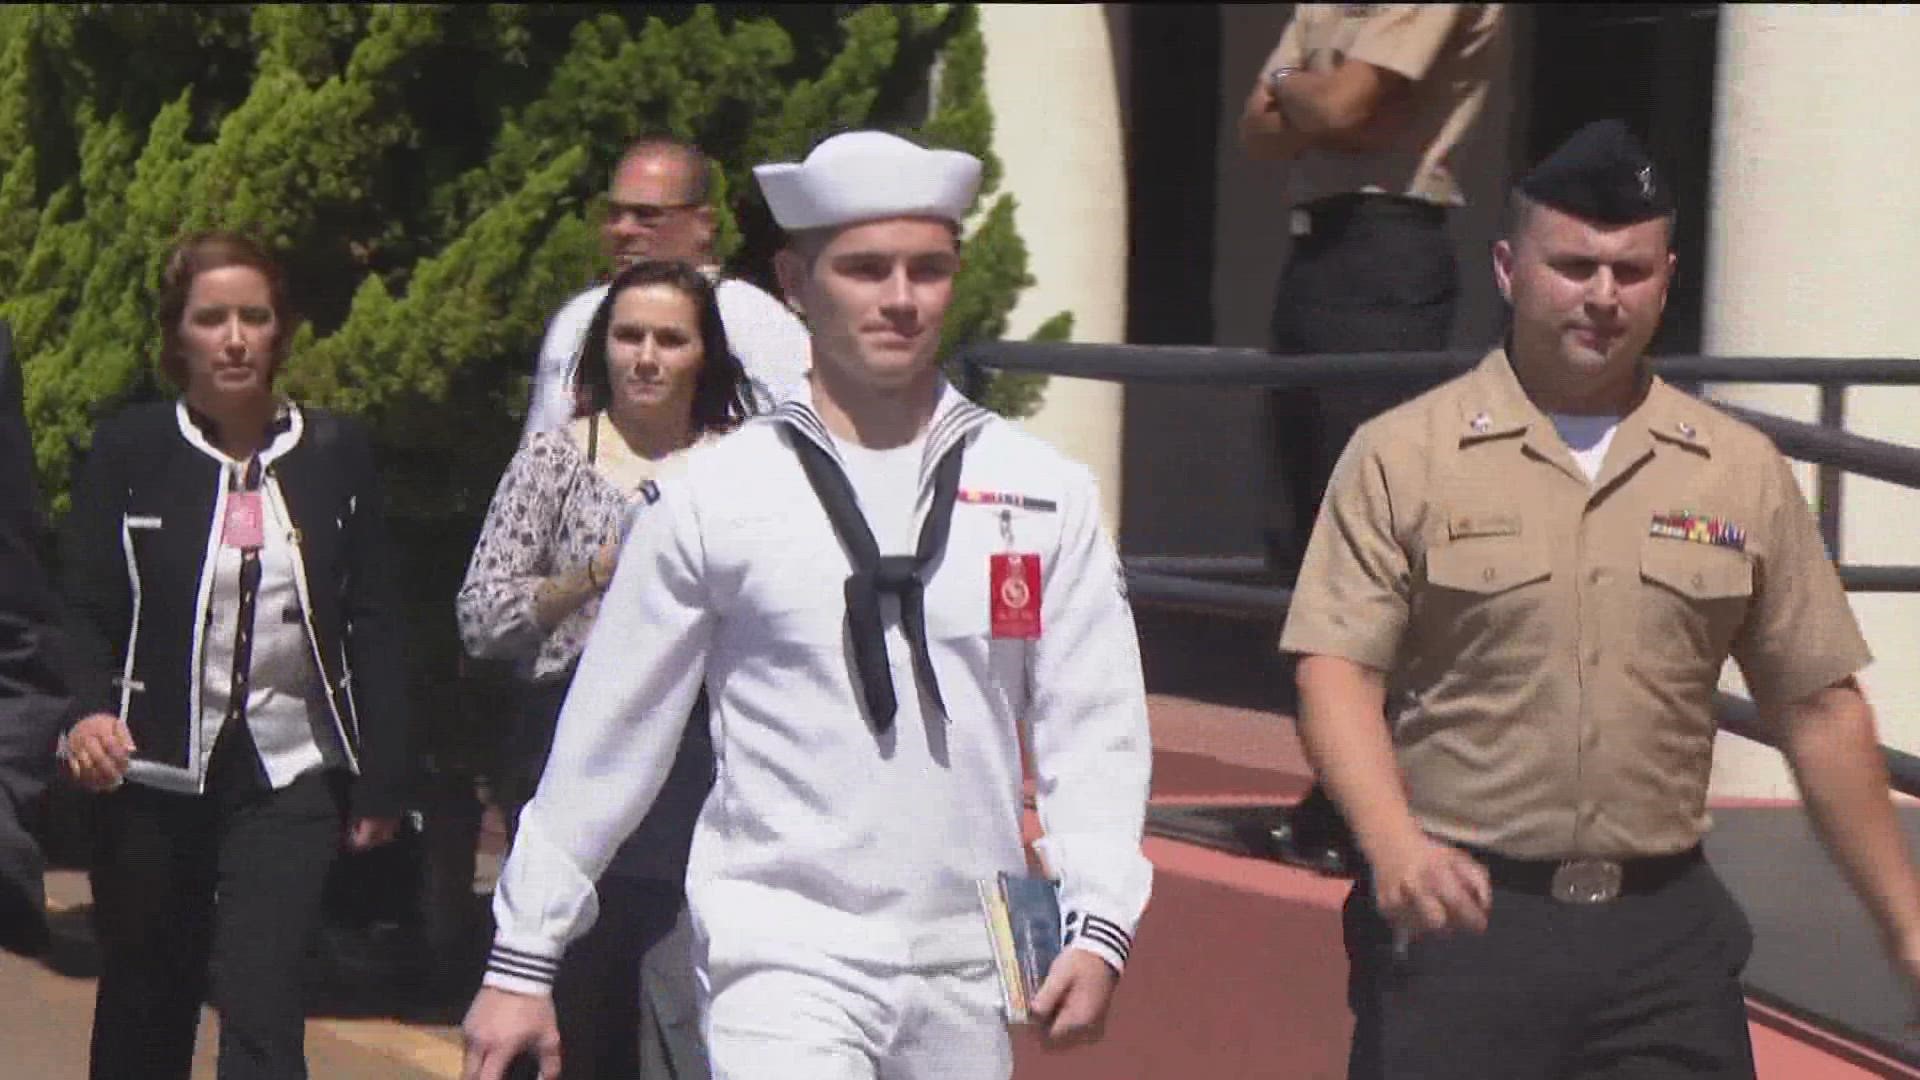 21-year-old Seaman Ryan Mays faces a maximum of life in prison if found guilty.